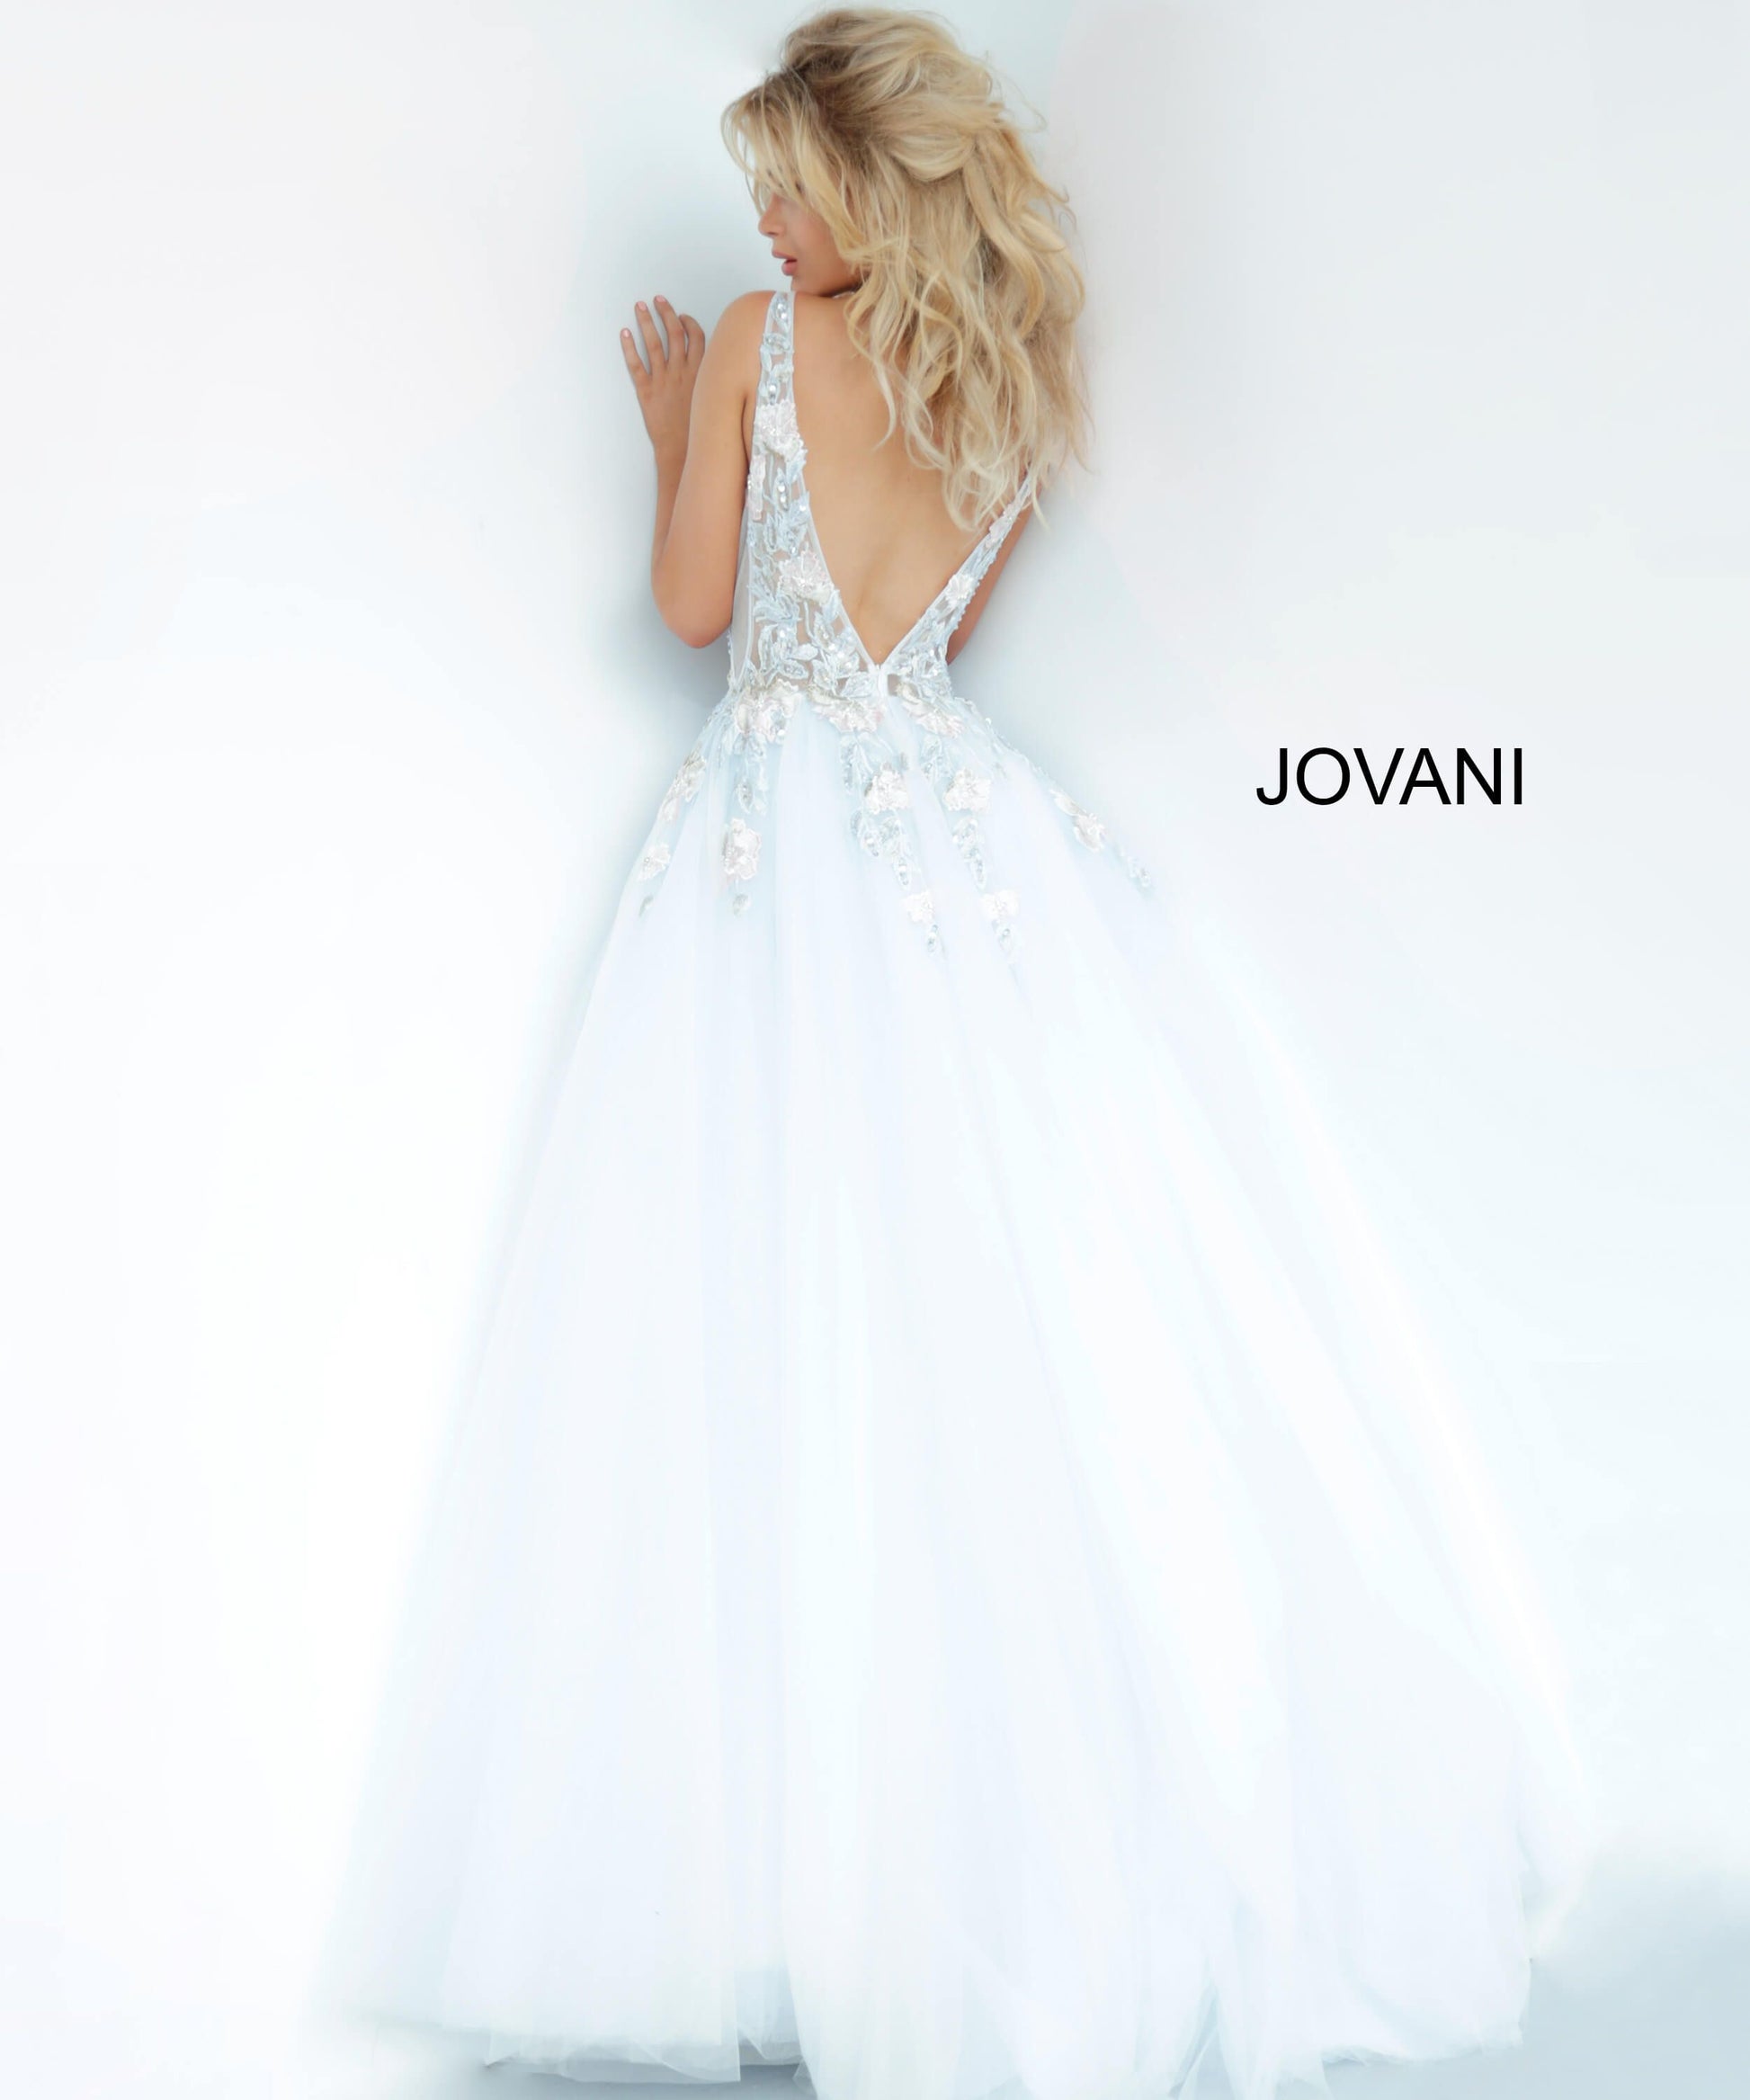 Jovani 11092 floral embellished plunging neckline tulle prom dress ball gown evening dress. Long Sheer floral lace applique embellished formal ball gown evening. Prom Dress, Pageant Gown.  Light blue tulle prom ballgown with floral embroidered bodice featuring a sheer sleeveless bodice, plunging neckline and low v-shaped back with zipper, floor-length A-line skirt. Available colors:  Blush, Light Blue